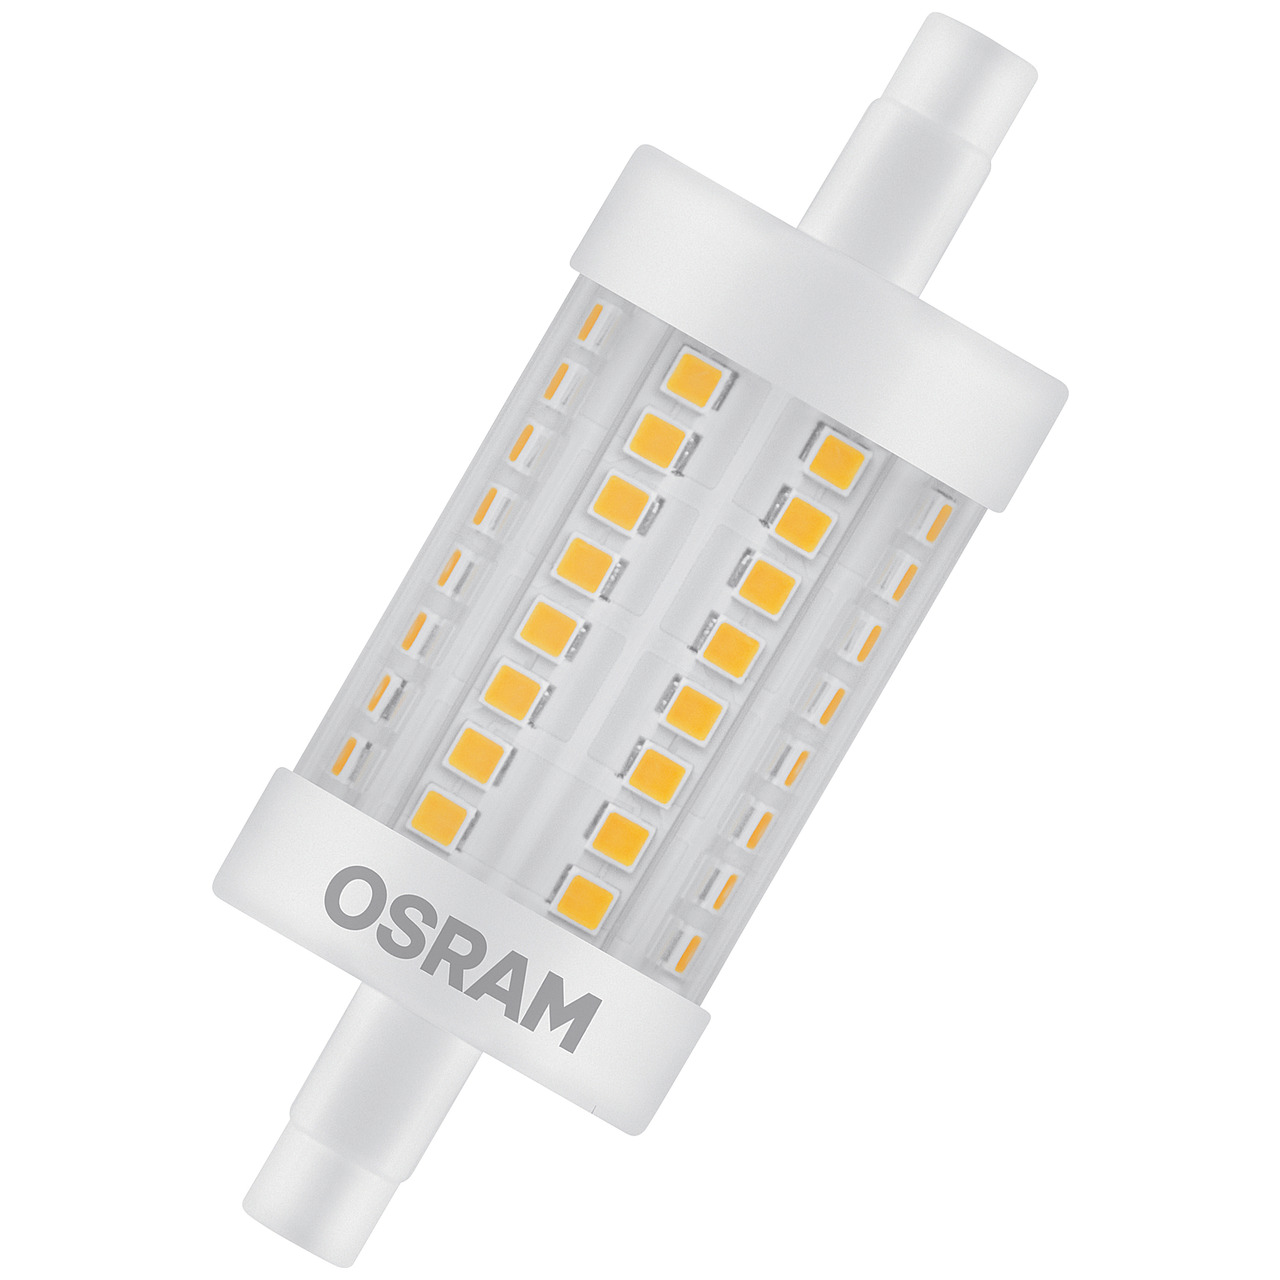 OSRAM LED SUPERSTAR 8-5-W-R7s-LED-Lampe 78 mm- warmweiss- dimmbar